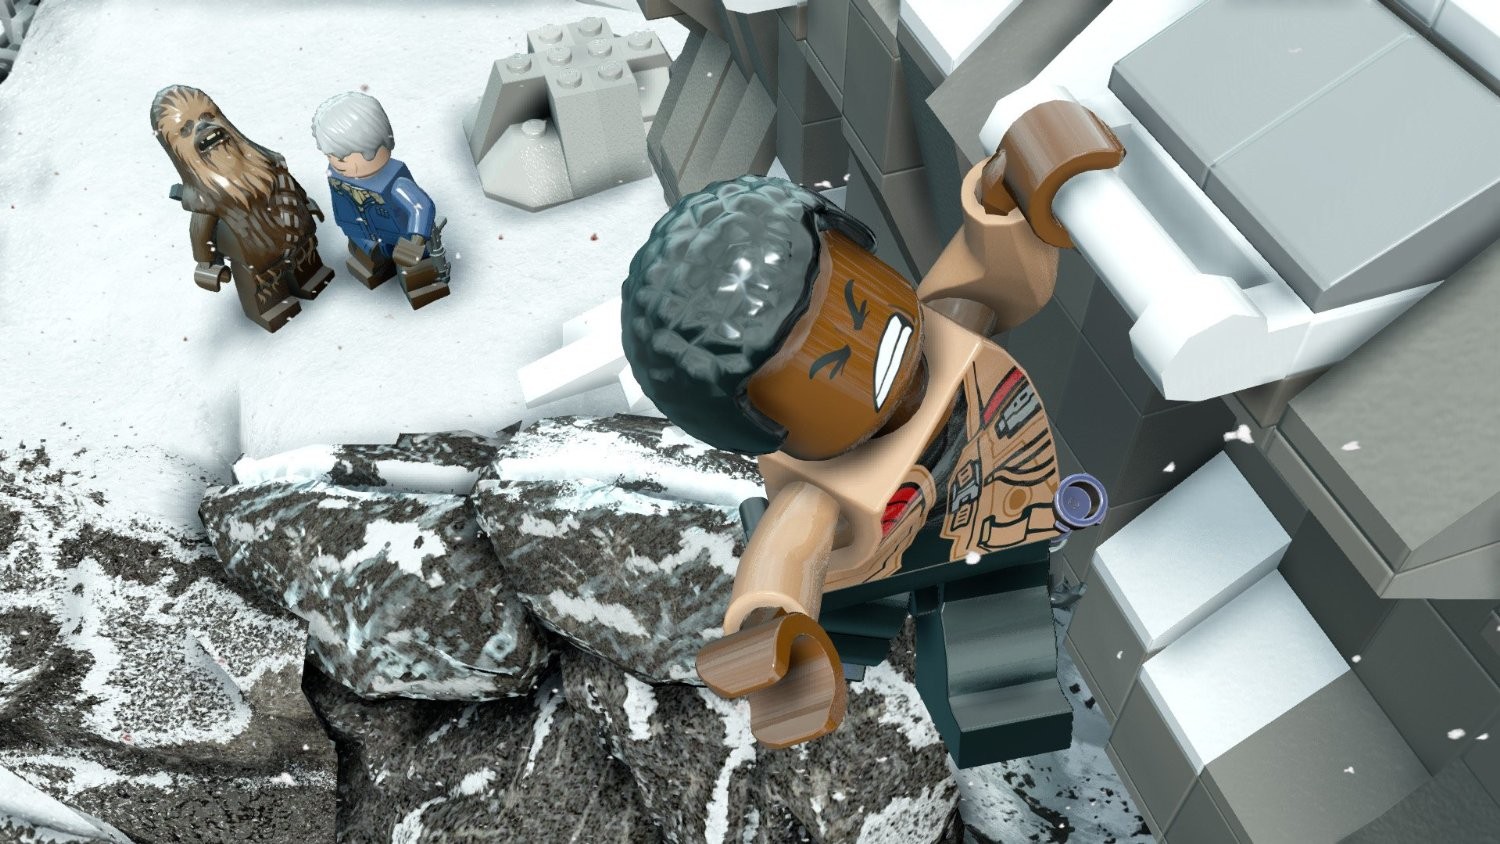 lego star wars the force awakens xbox one review